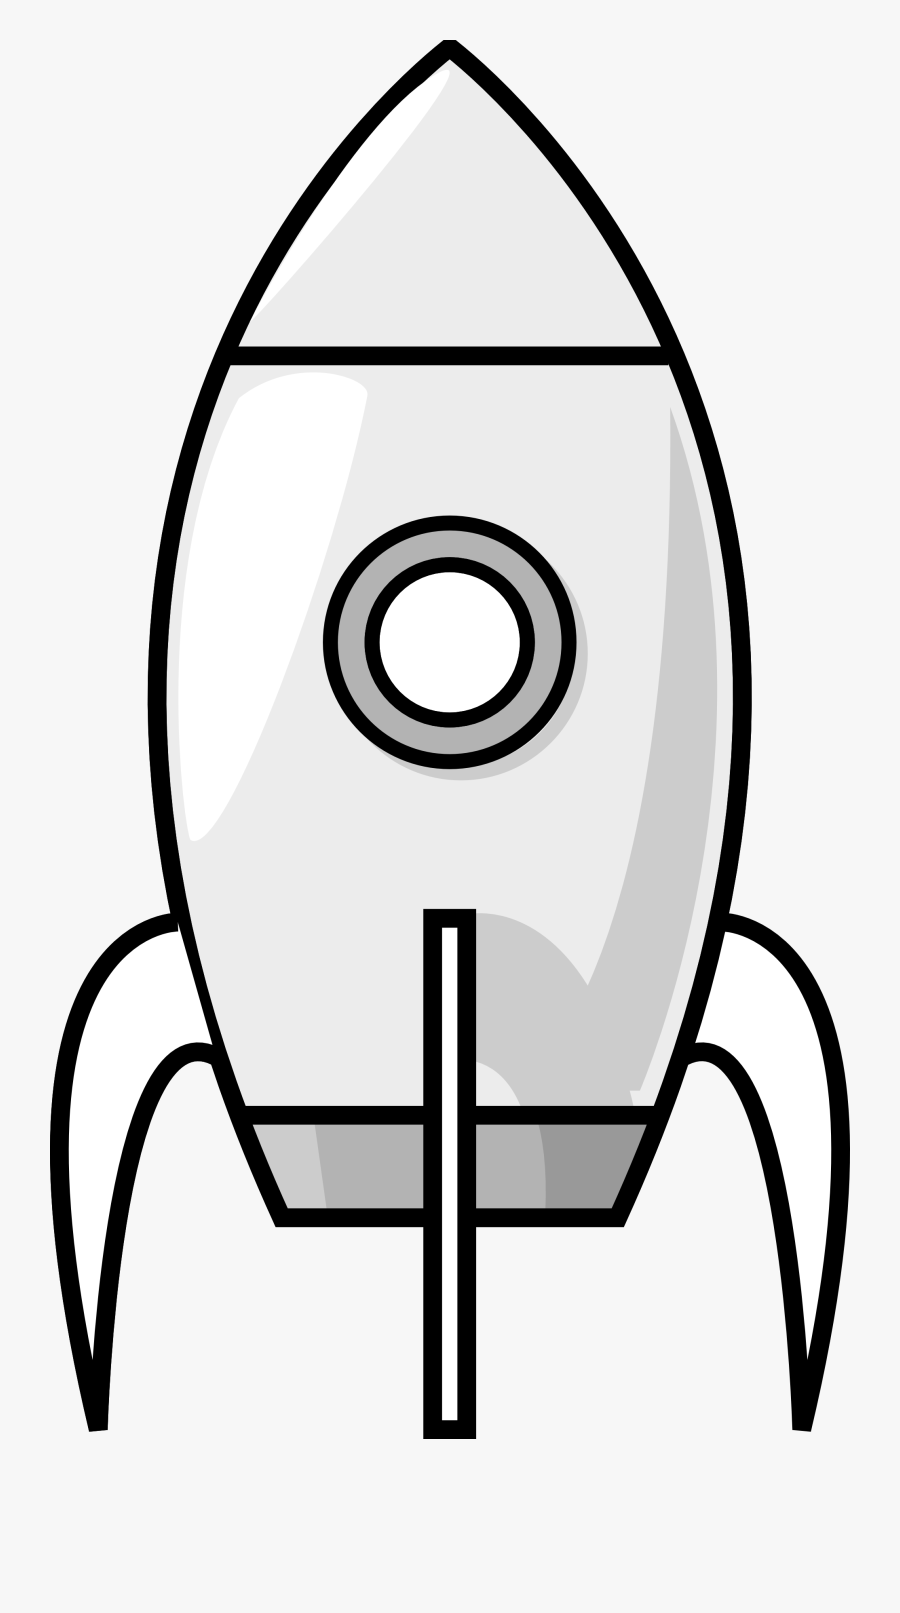 Moon Black And White Moon Clip Art Black And White - Rocket Ship Clipart Black And White, Transparent Clipart